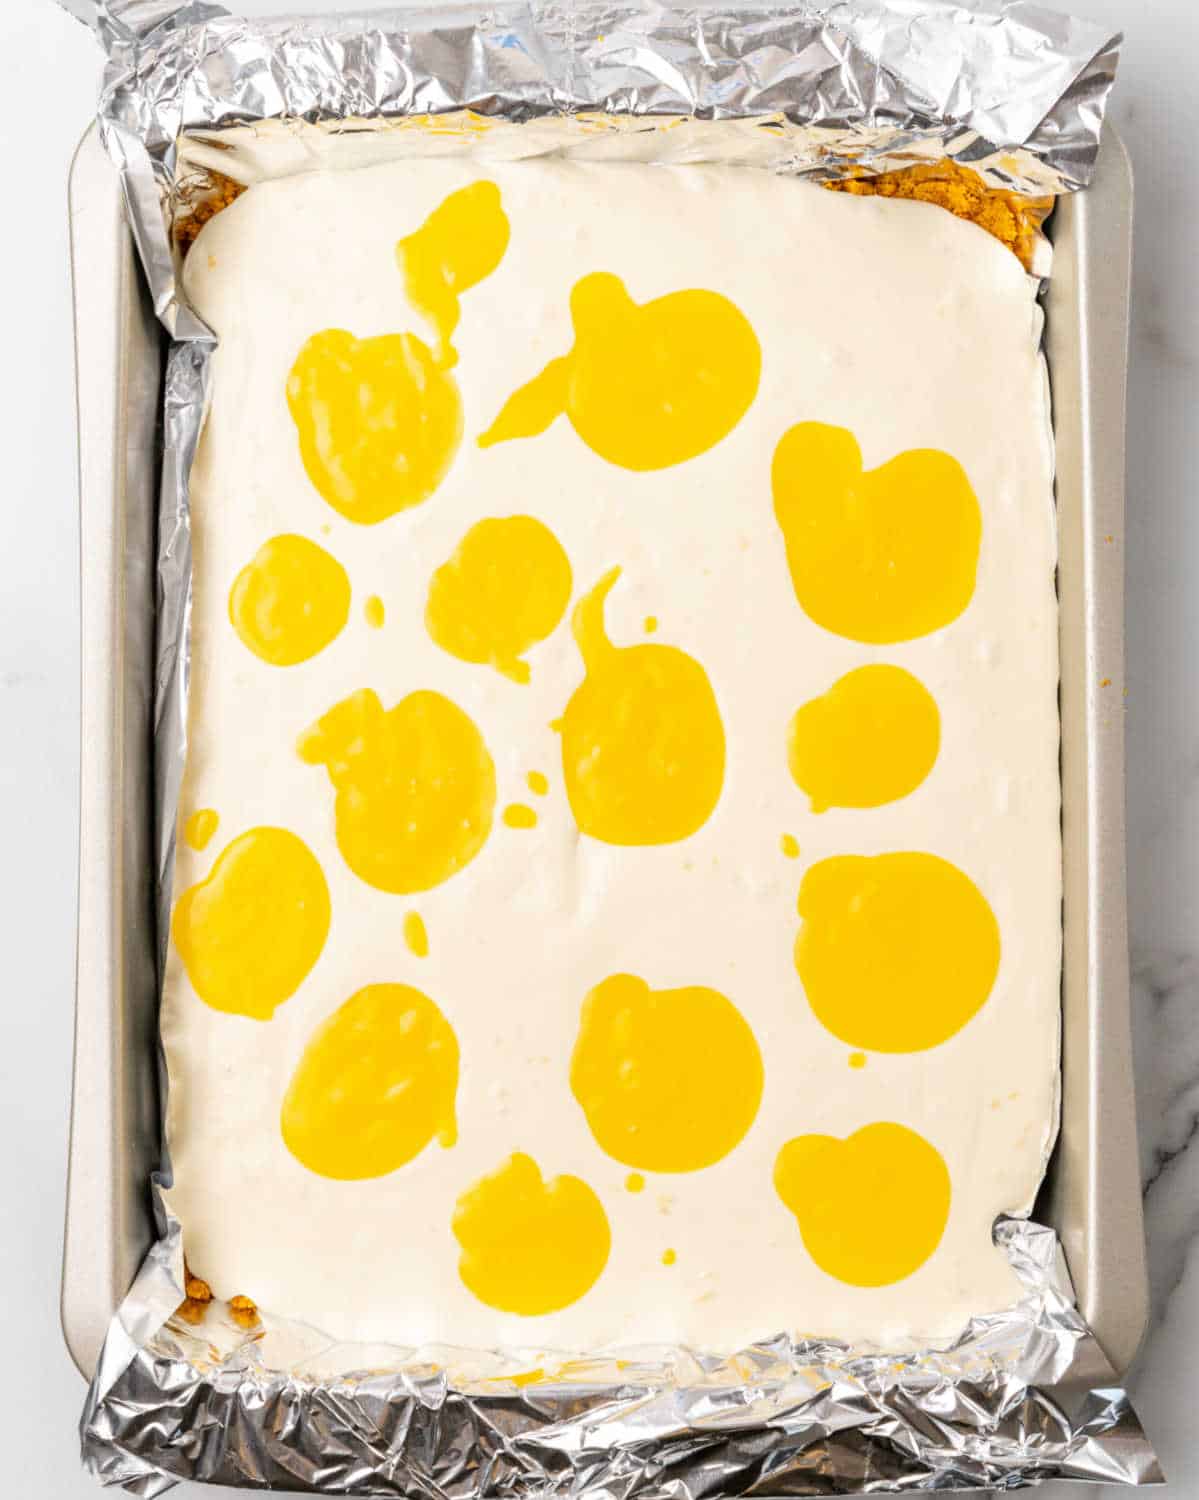 No bake cheesecake batter with mounds of passionfruit curd in a foil-lined rectangular pan on a white surface.